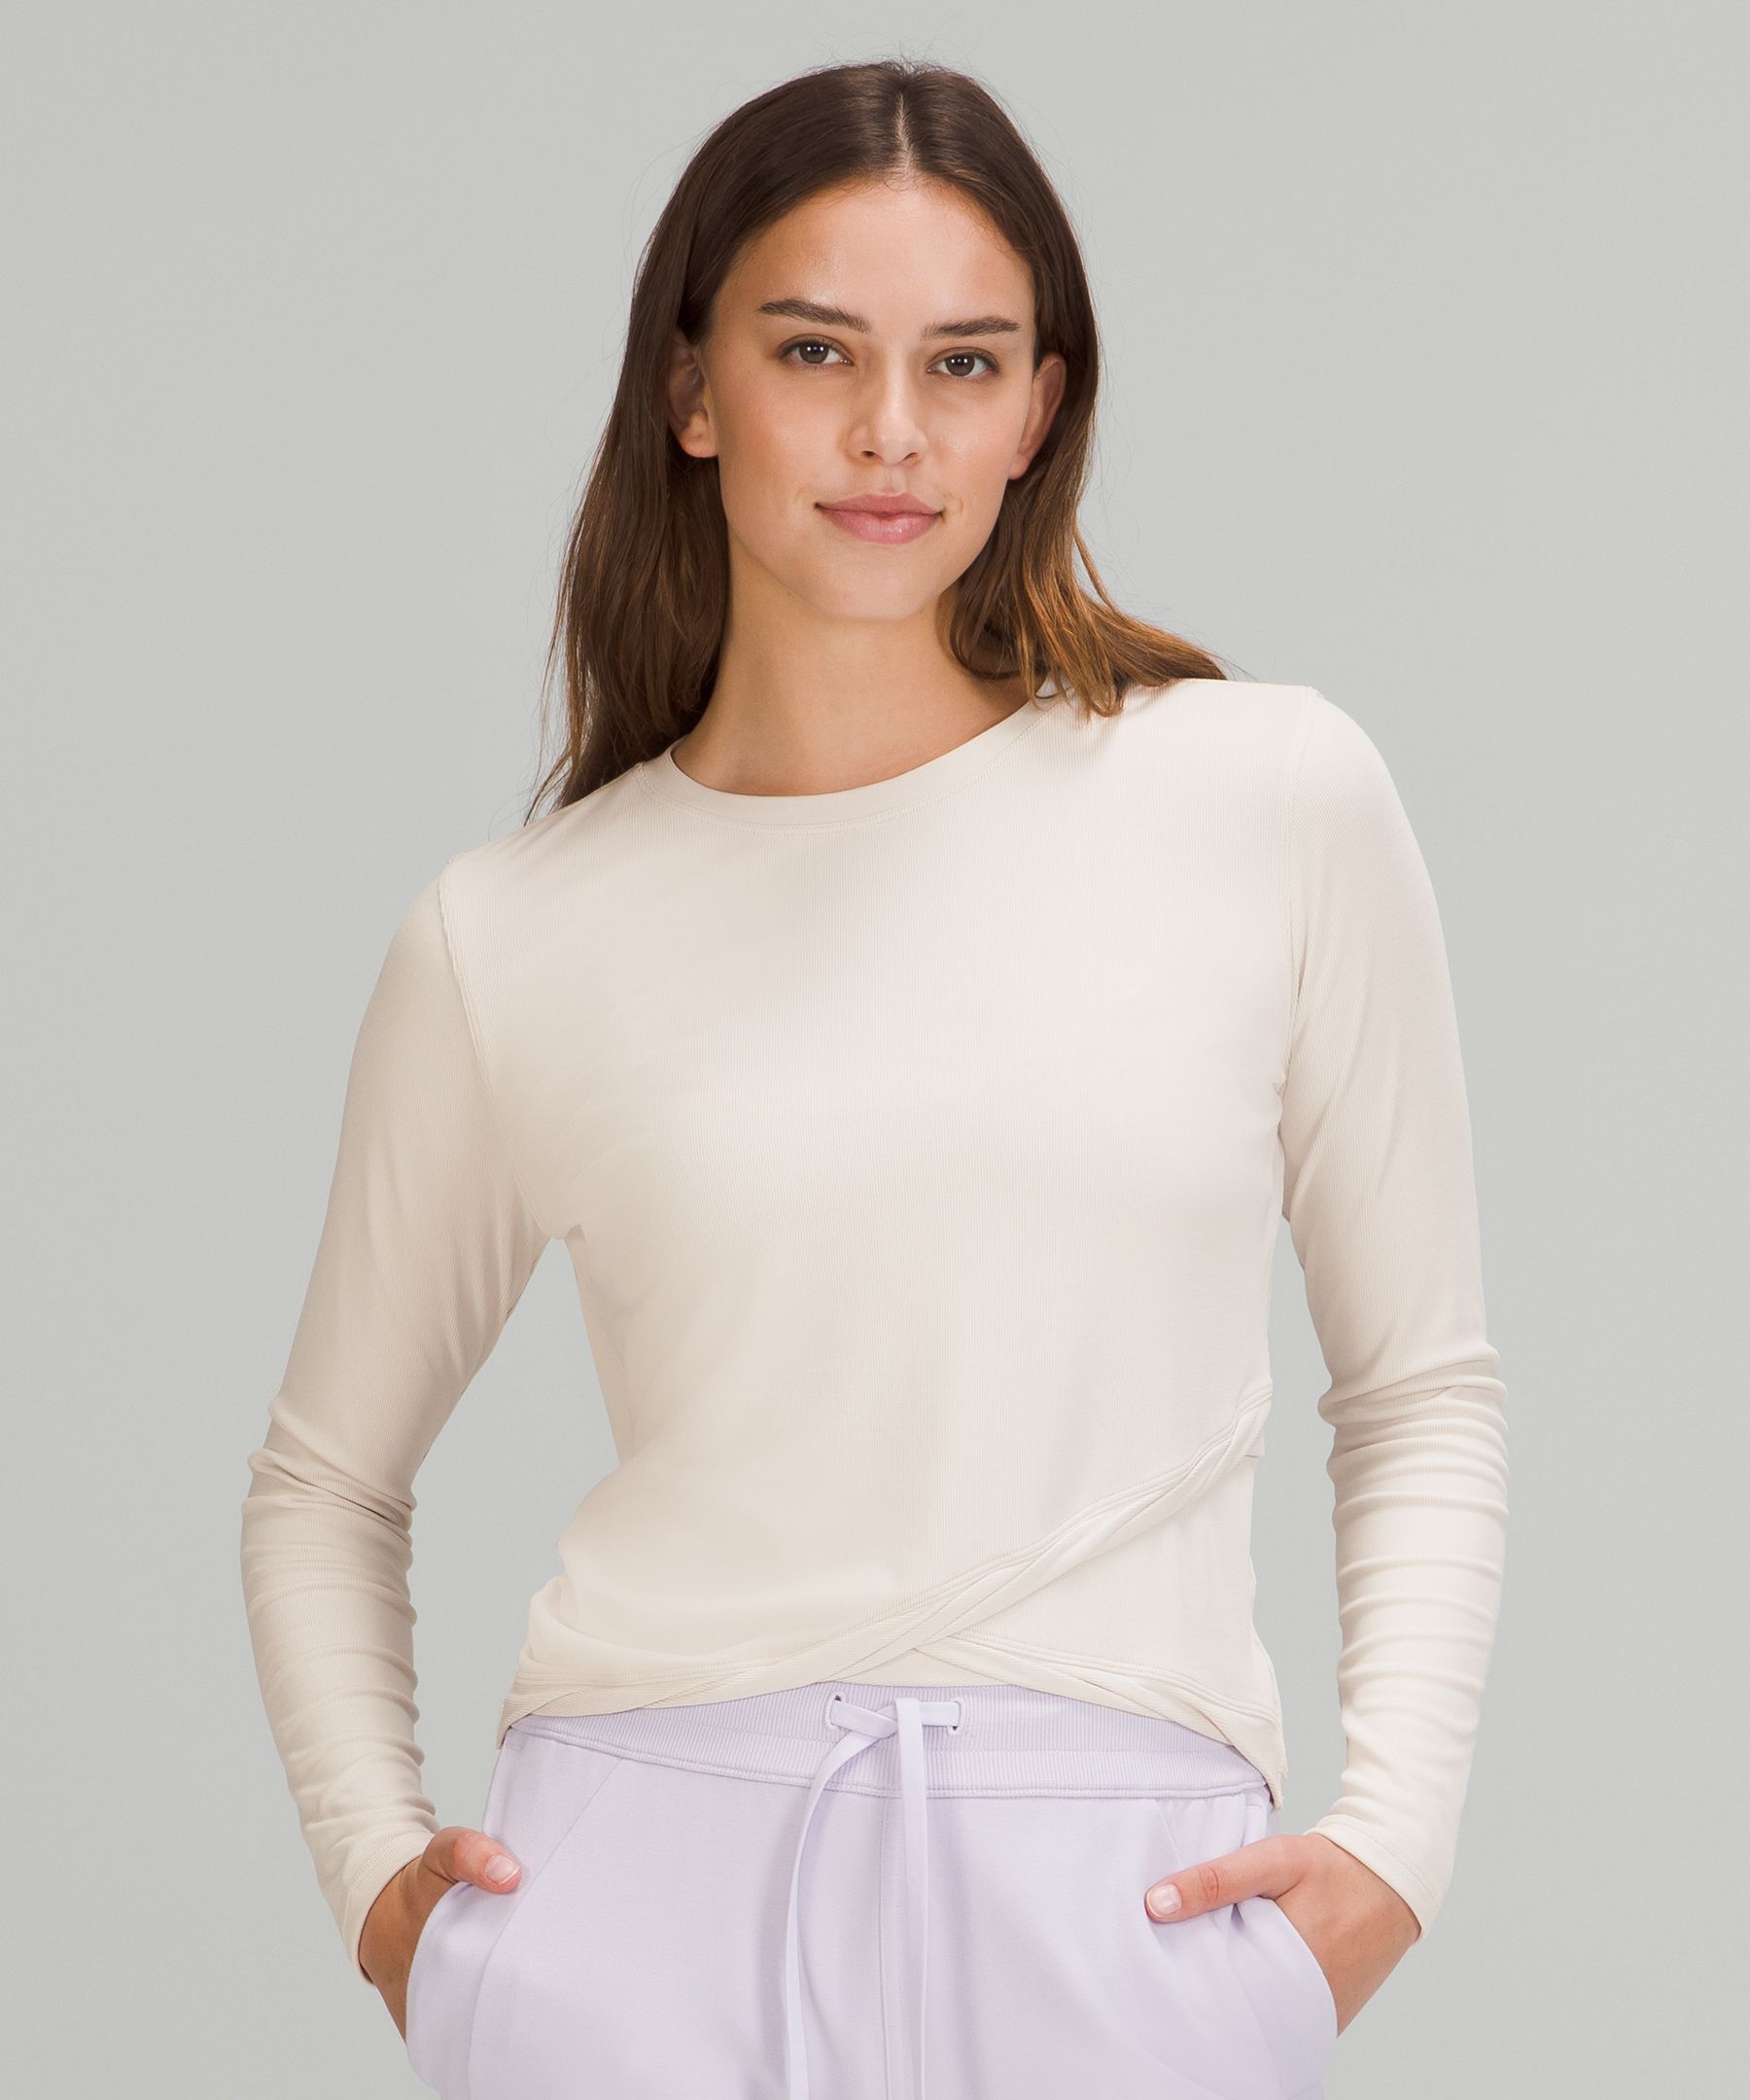 Lululemon Do The Twist Long Sleeve Shirt In Pink Taupe